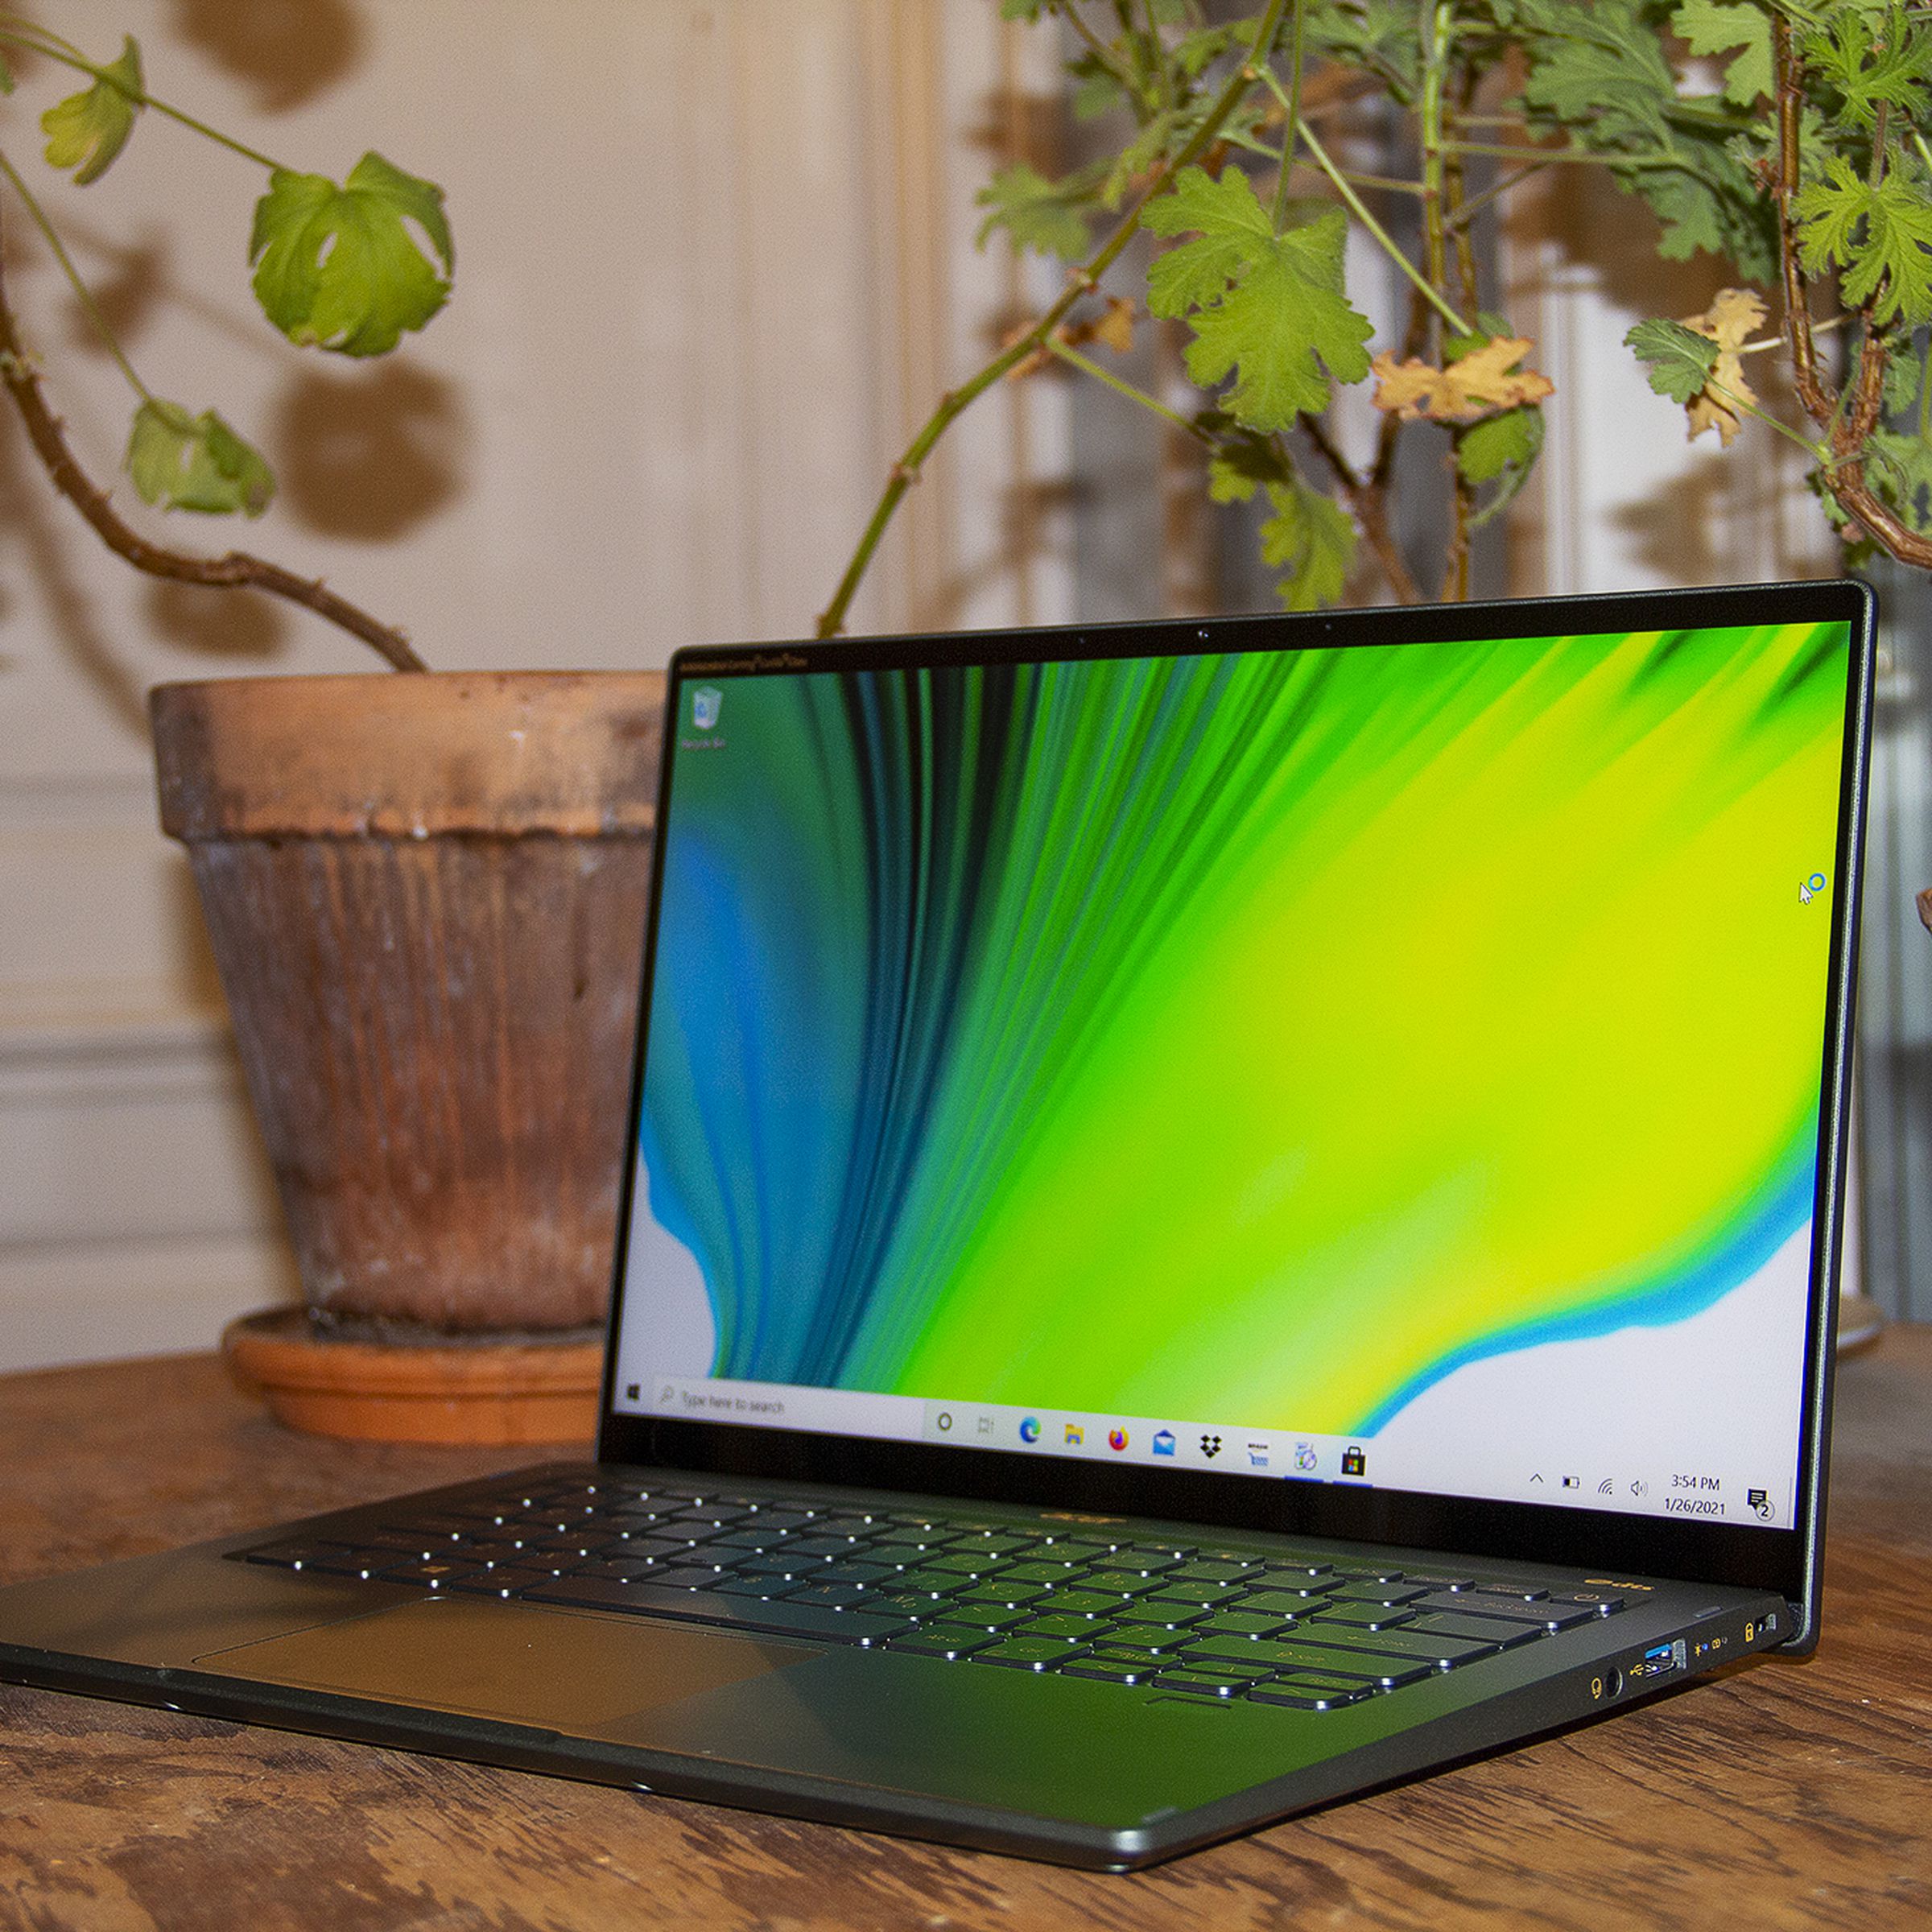 The Acer Swift 5 on a table in front of two house plants, open and angled to the left. The screen displays a green, blue, and white background.